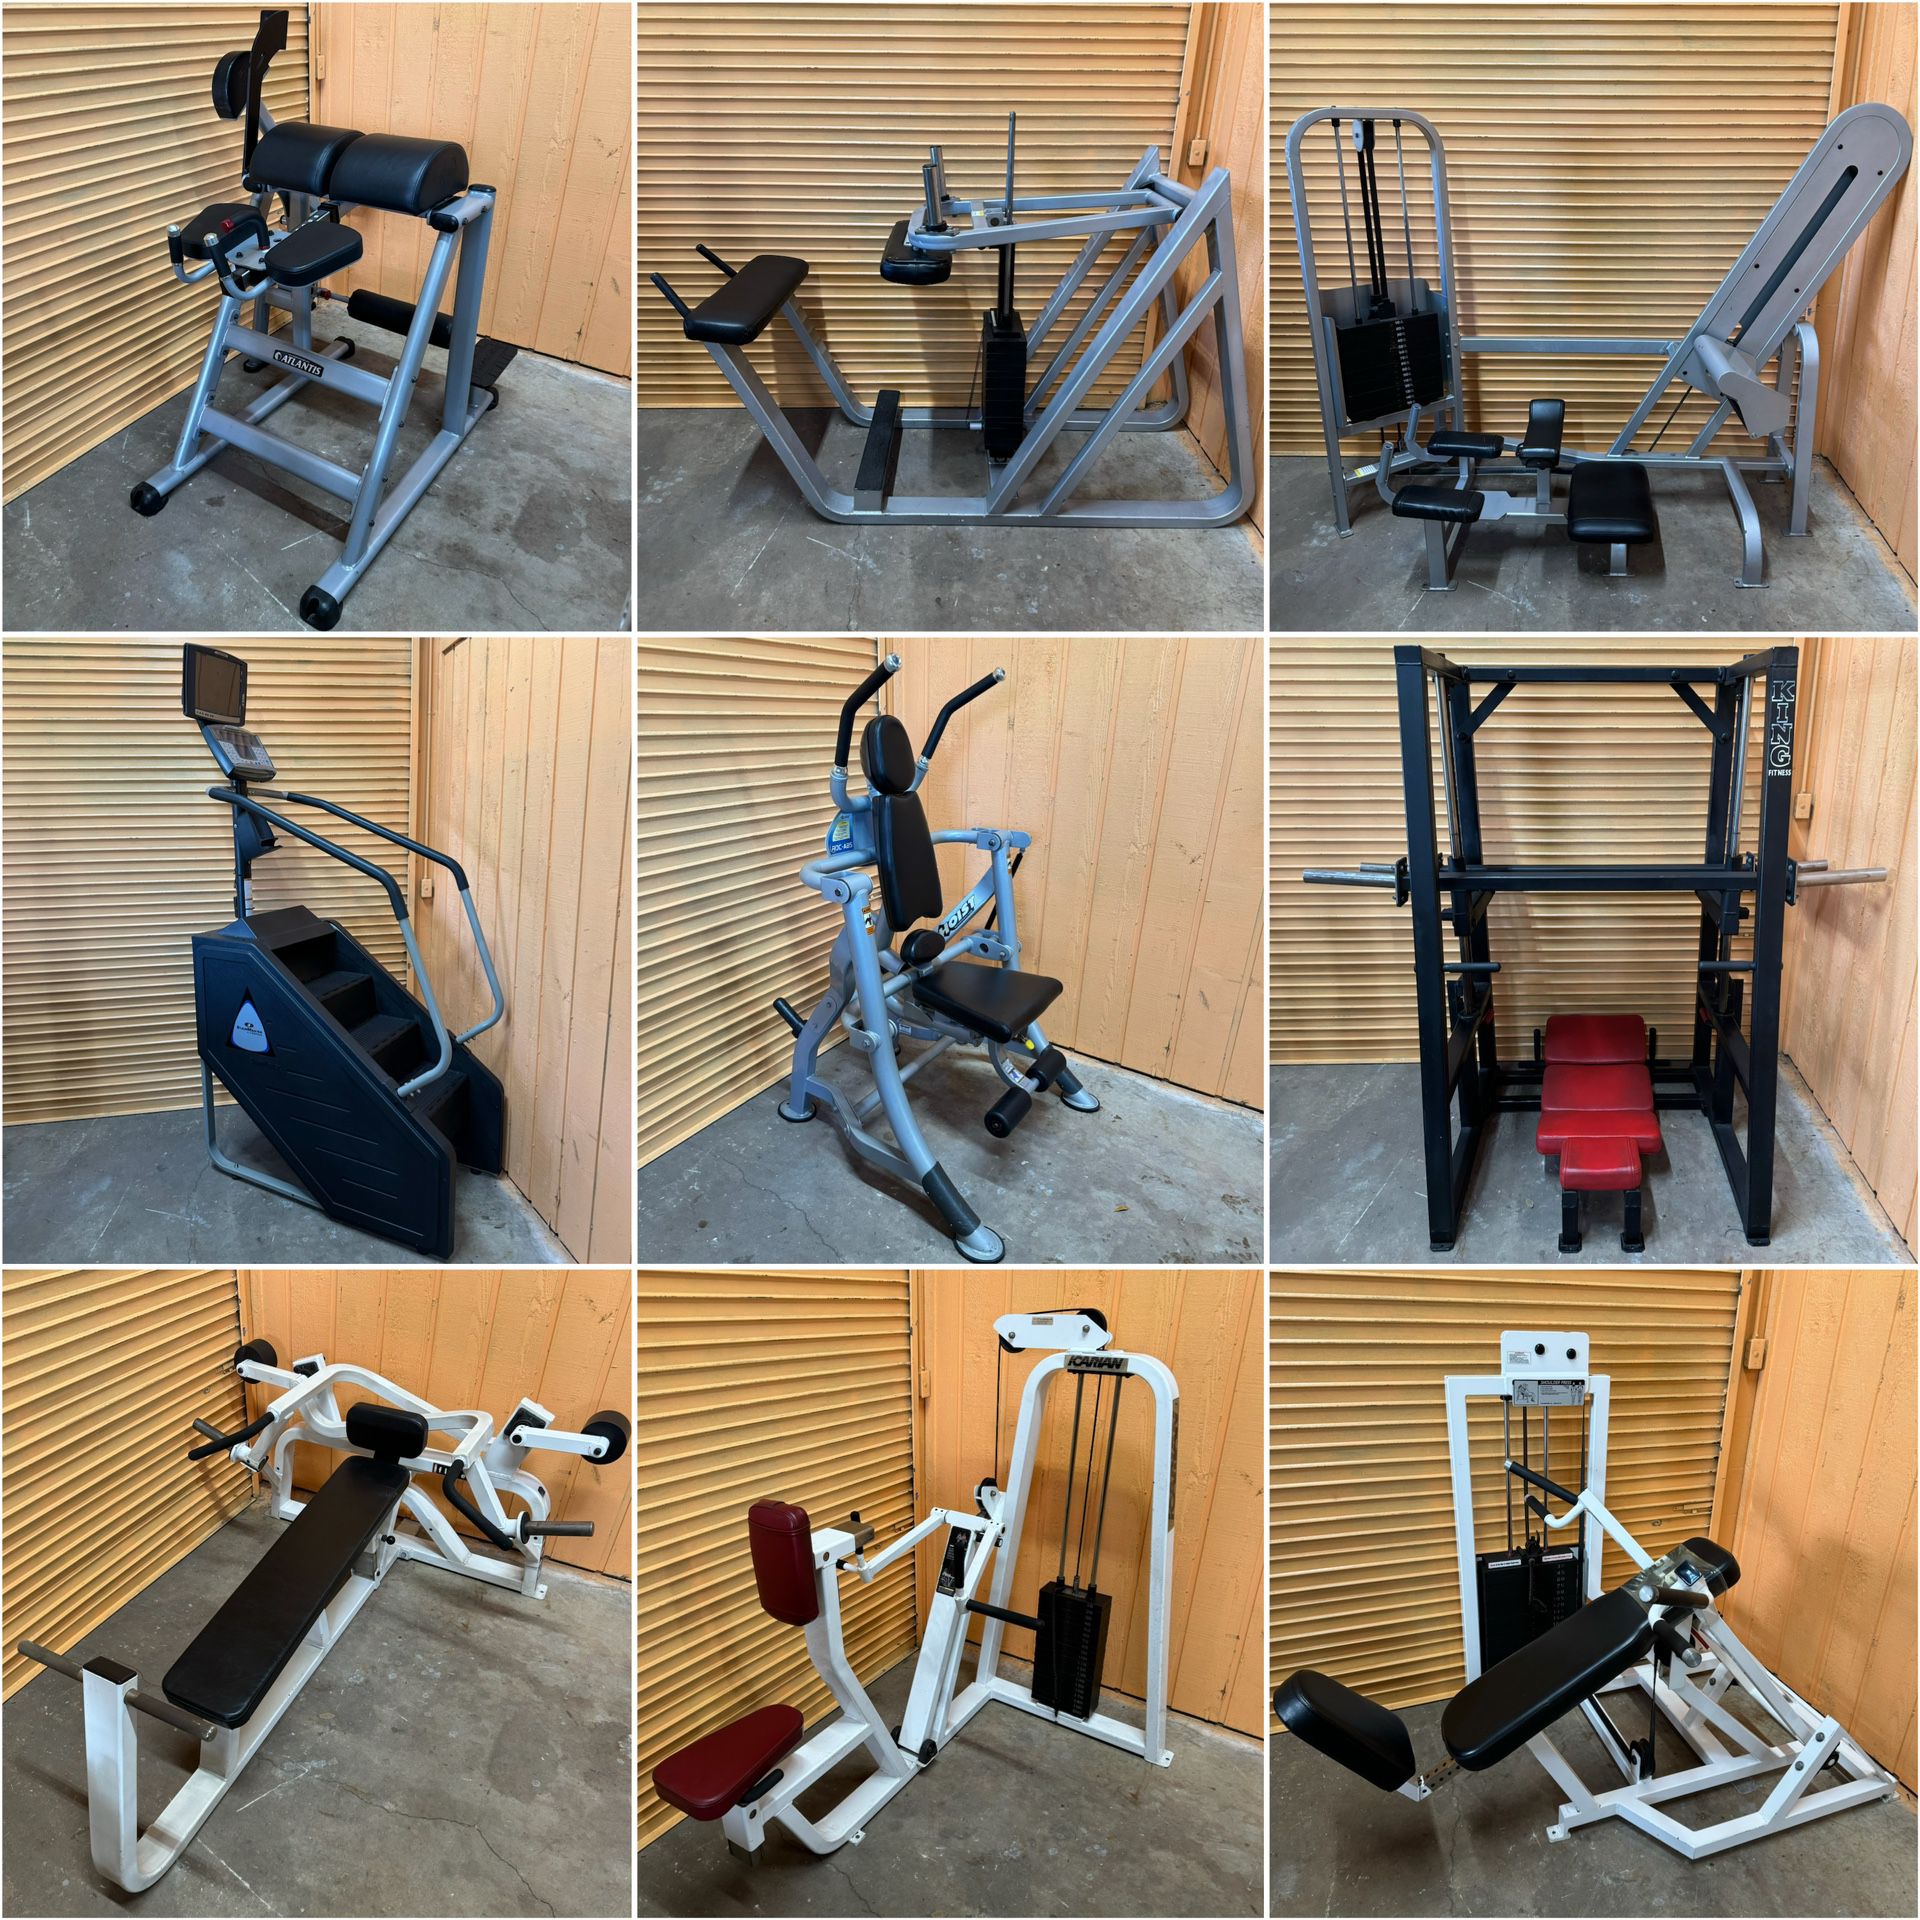 Tons Of Commercial Gym Equipment- Squat Rack, Leg Press, Weight Bench, Functional Trainer, Crossover